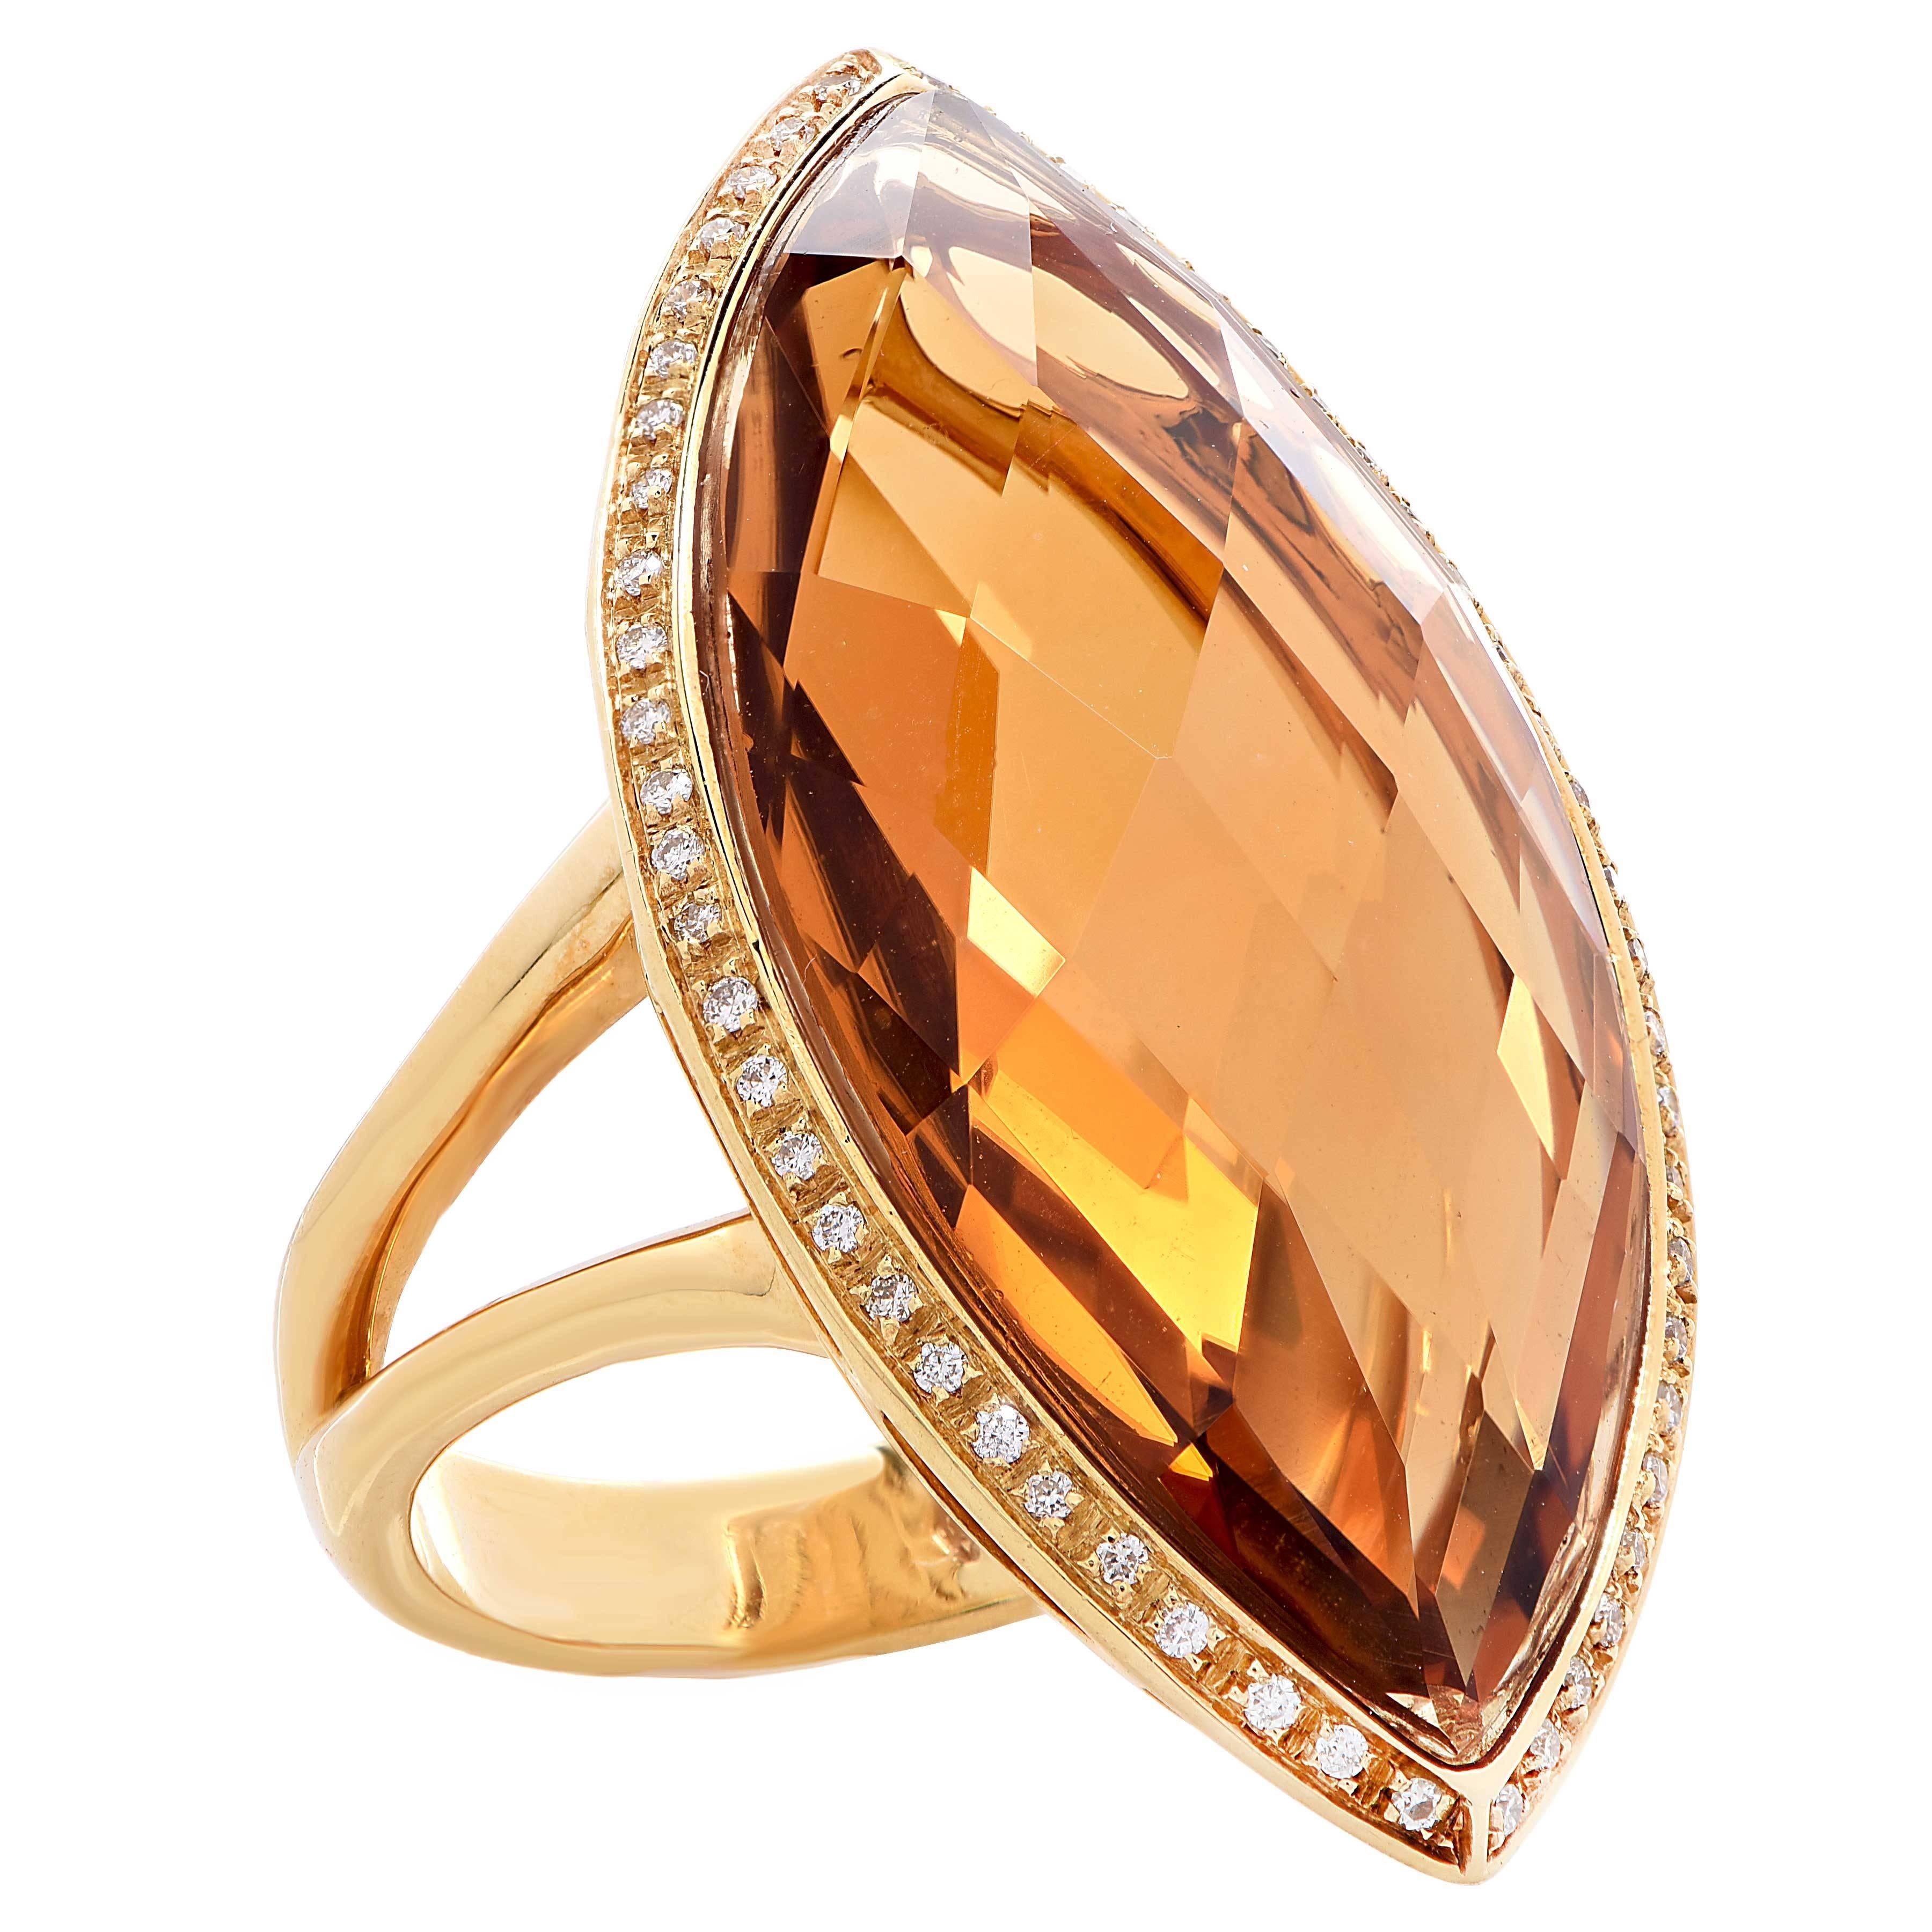 23 Carat Natural Citrine Diamond Yellow Gold Ring In New Condition For Sale In Bay Harbor Islands, FL